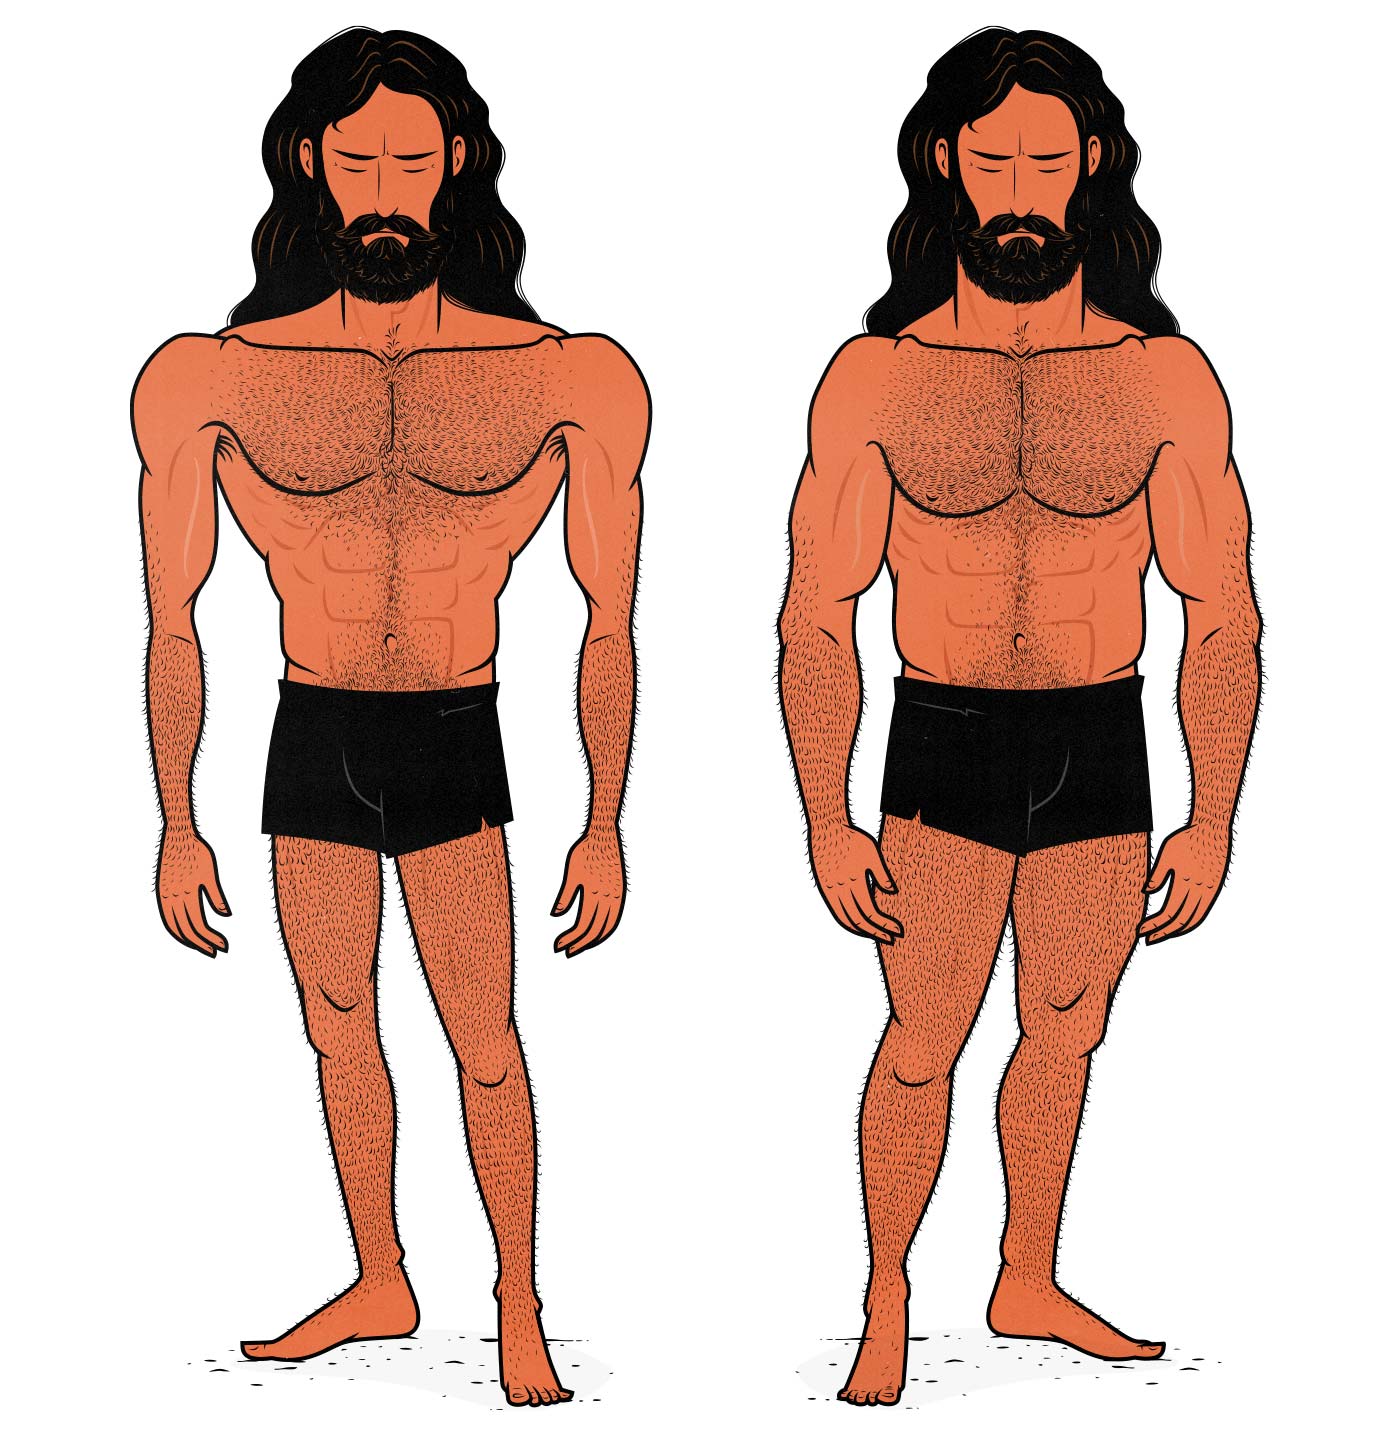 Illustration showing bodybuilders with different bone structures and muscle-building genetics.